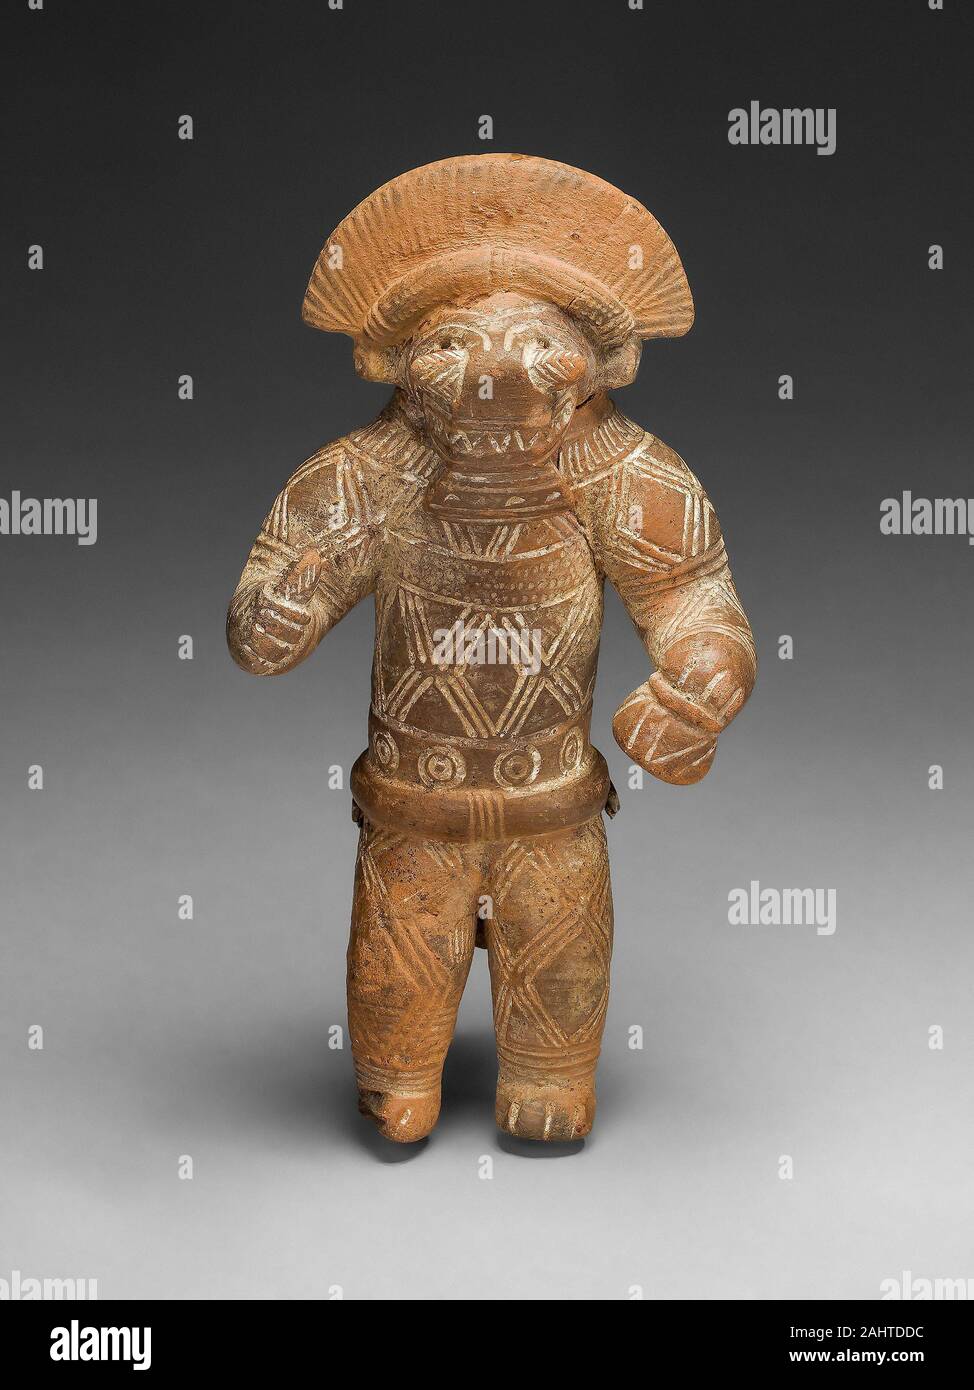 Tairona. Masked Figurine with Boar Headdress, Possibly a Ocarina (Whistle). 1200–1400. Colombia. Ceramic and pigment To this day in Tairona communities, masked individuals dance, personifying the deified forces and phenomena of nature. This act associates the annual round of social and economic activities with the natural world’s cycle of death, fertility, and renewal. Stock Photo